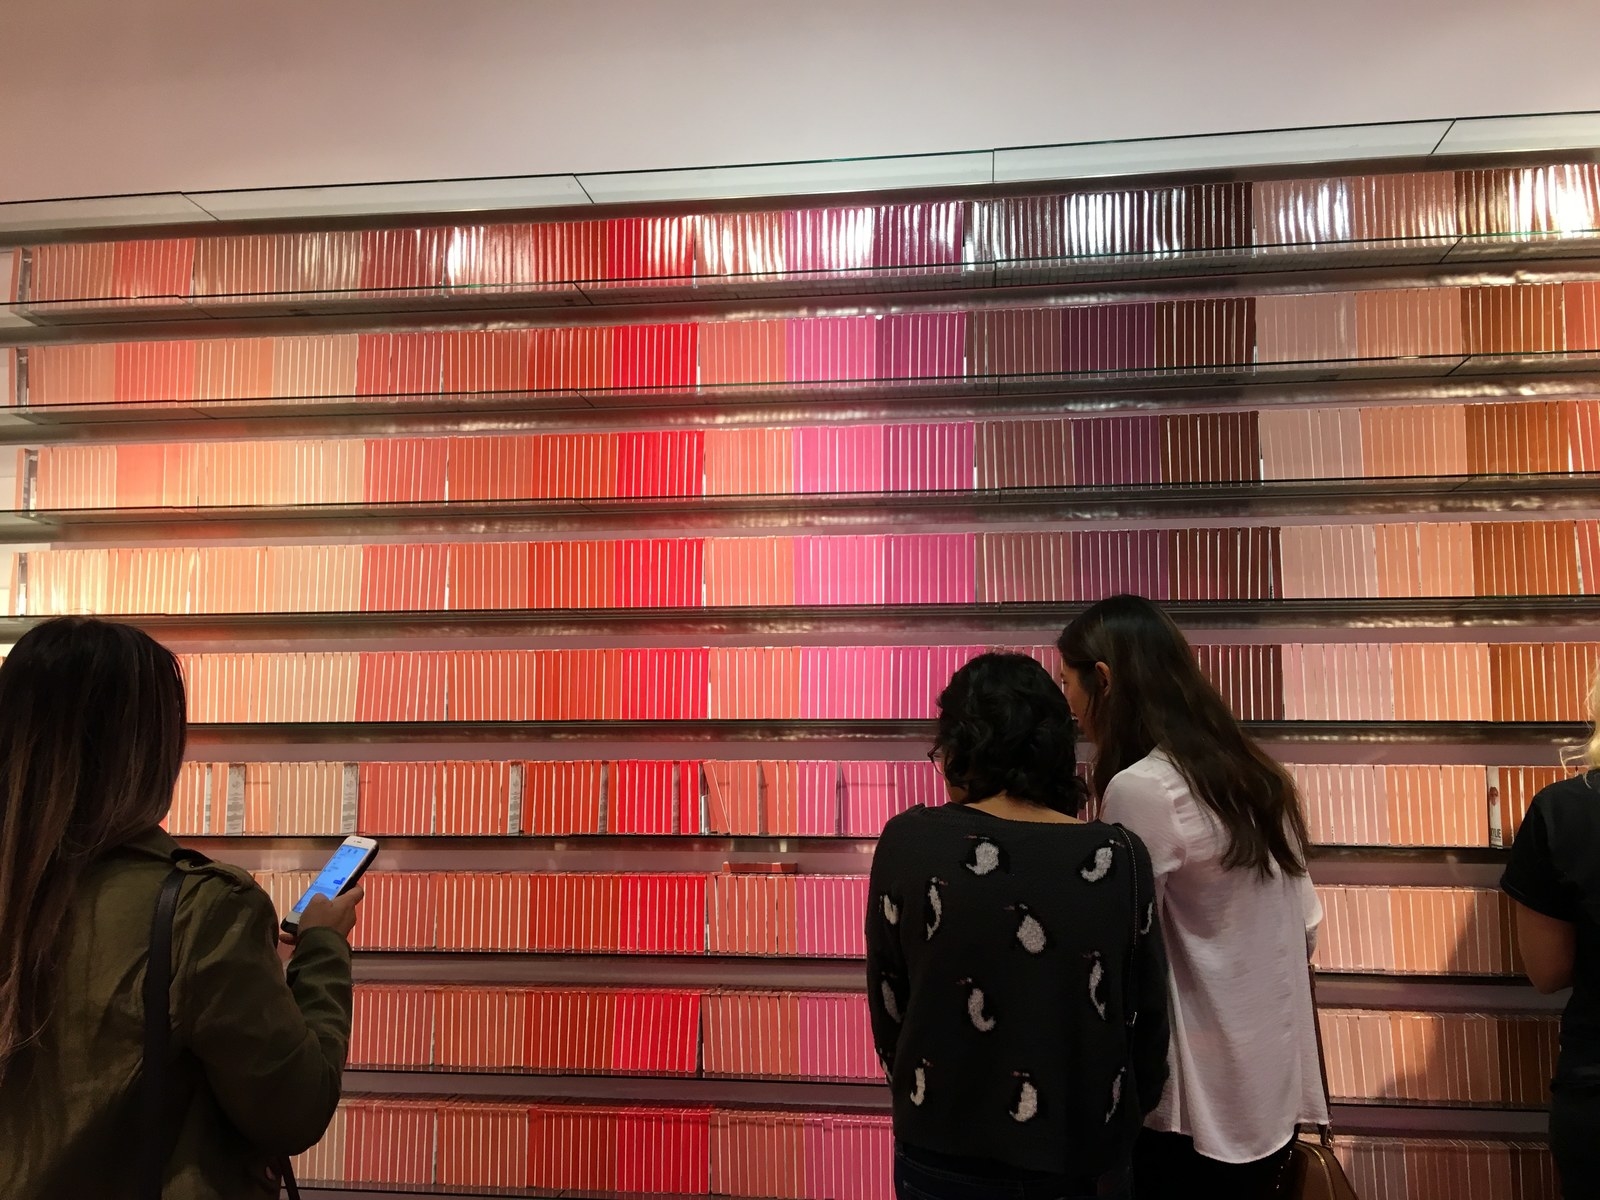 We Went To Kylie Jenner's Store And It Was Insane